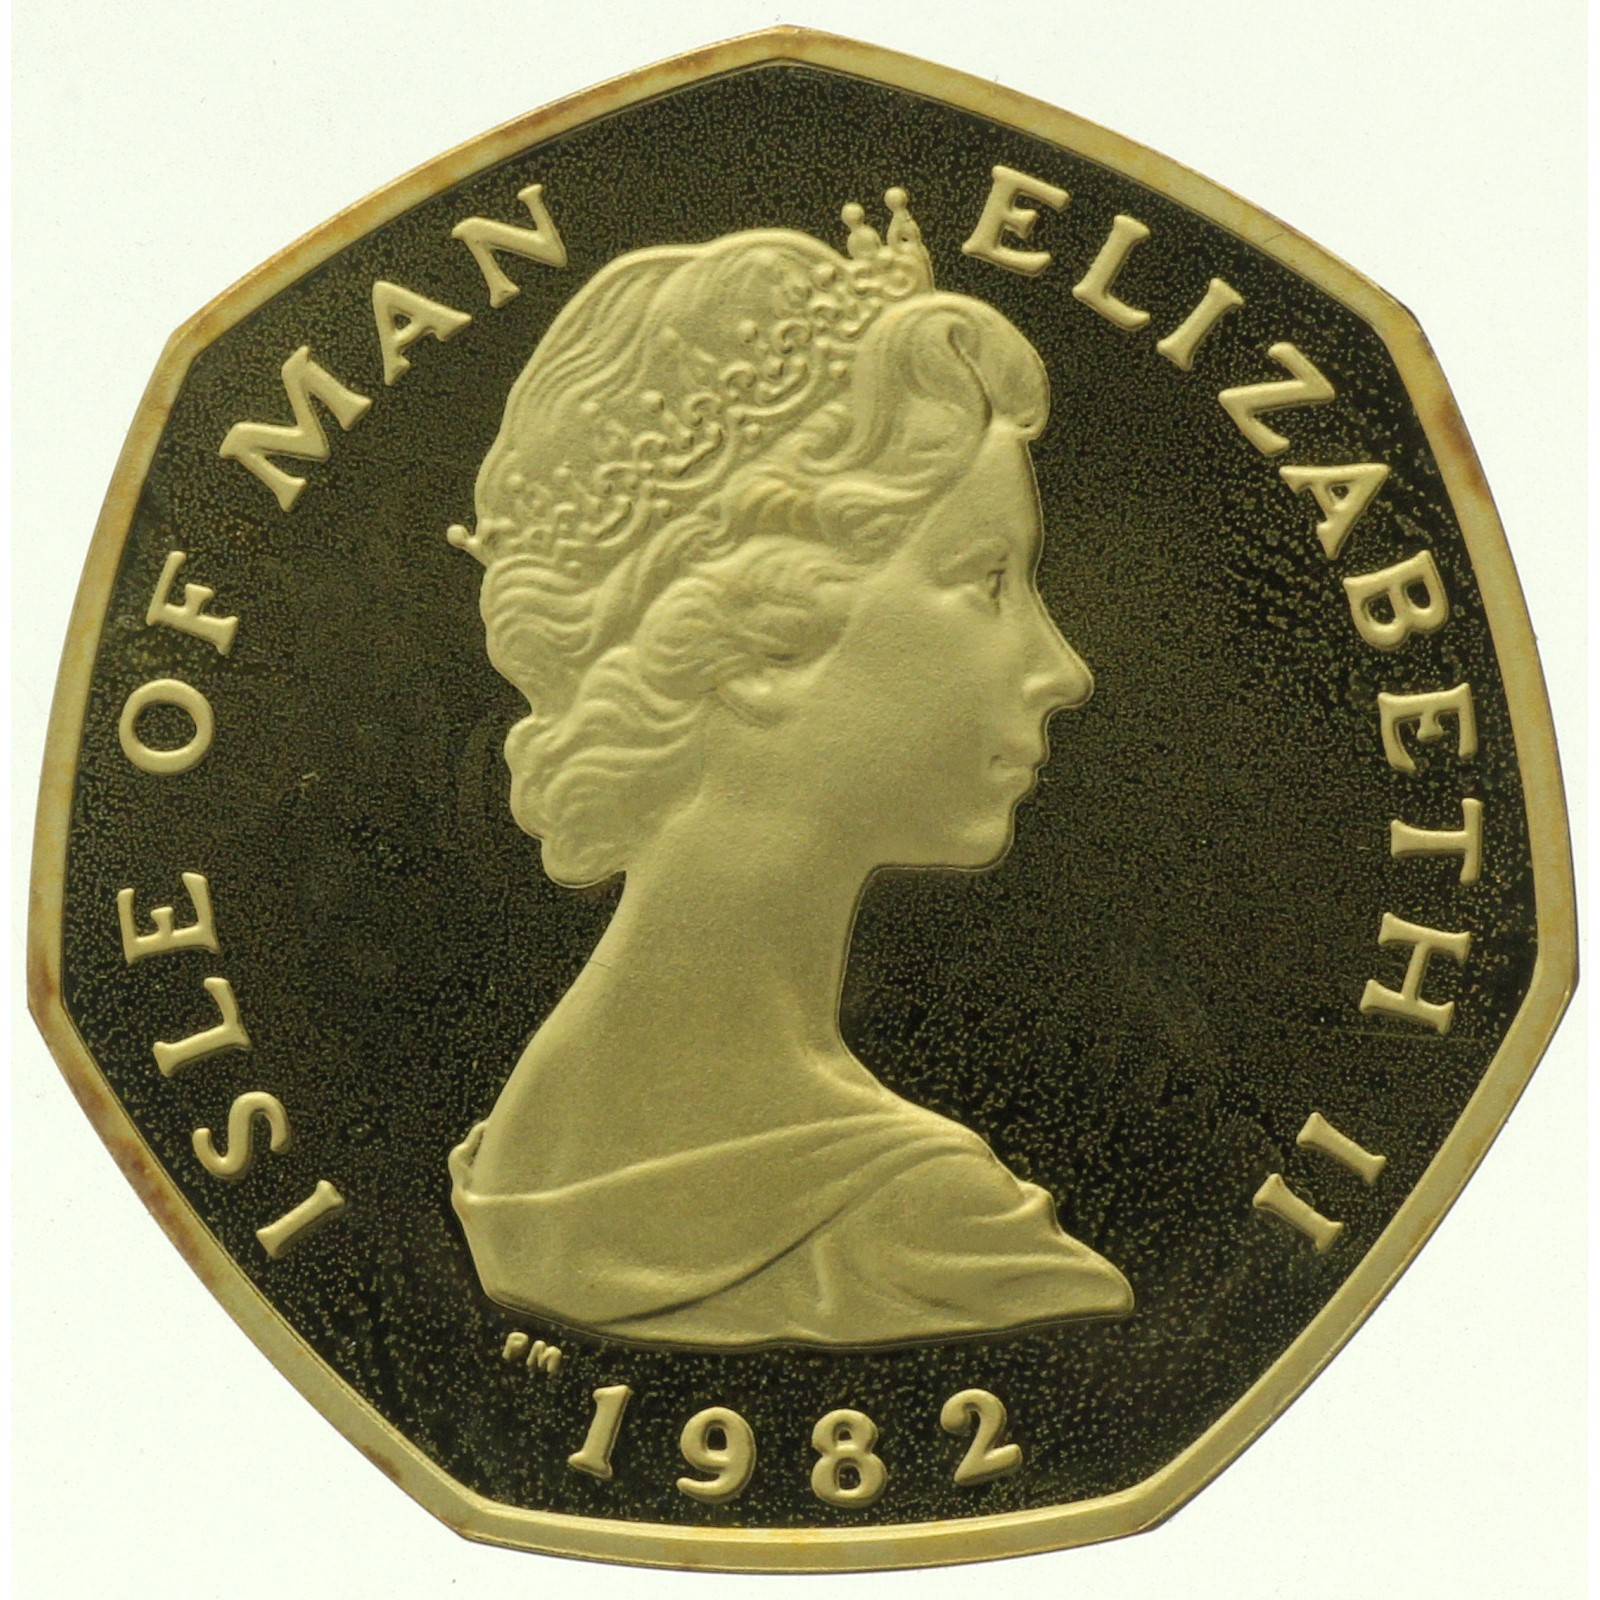 Isle of Man - 20 pence - 1982 - Gold issue